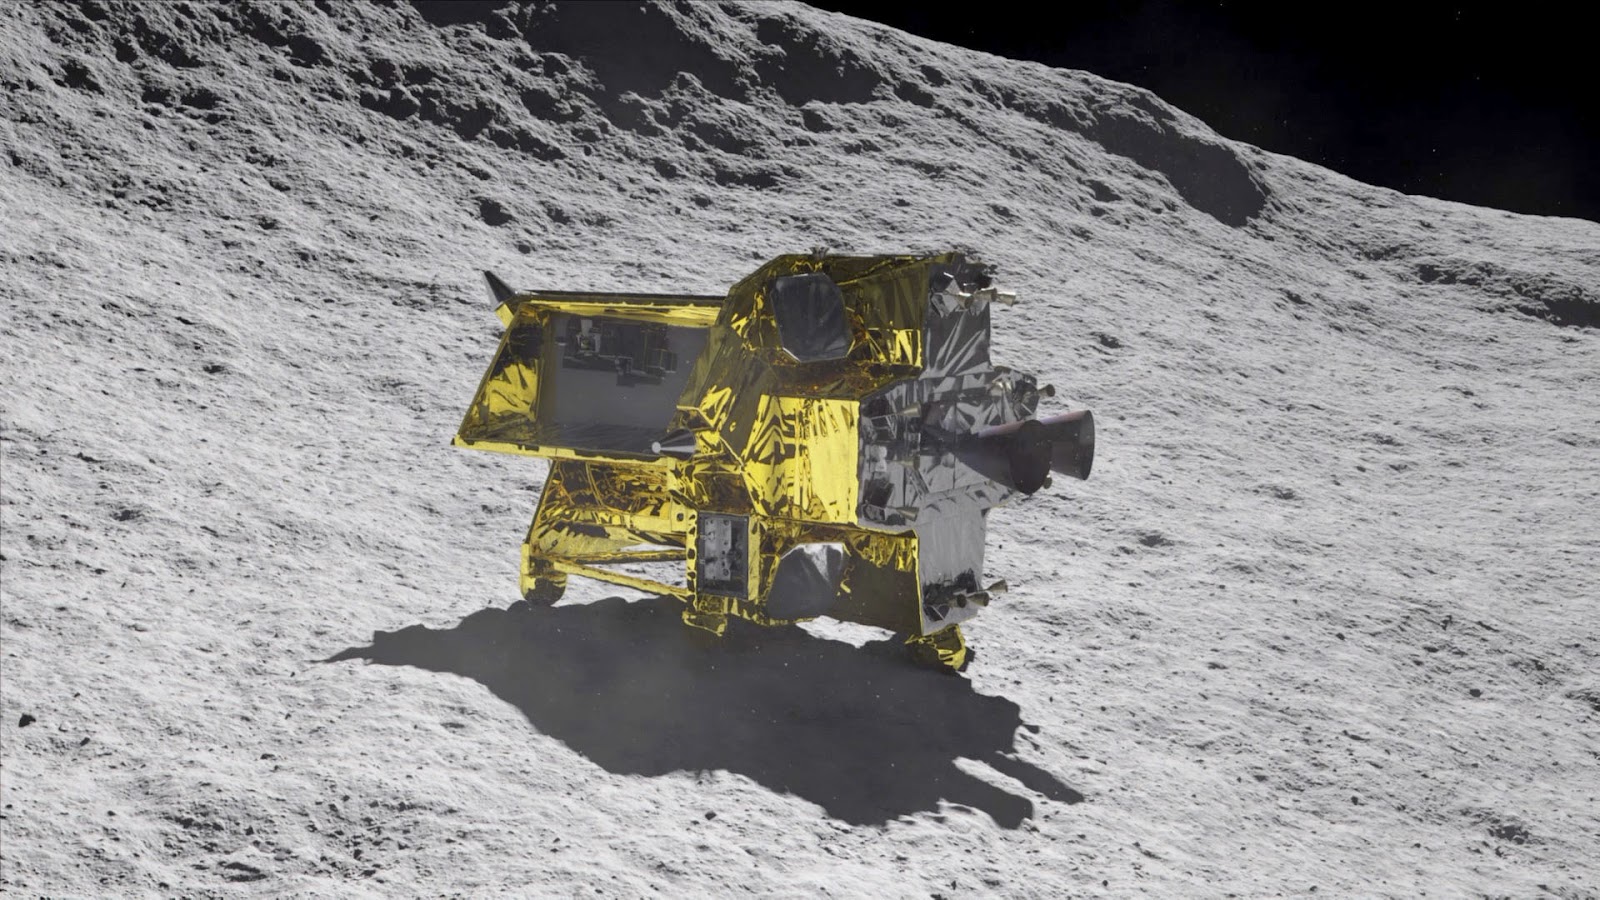 An artist's impression of the SLIM spacecraft on the surface of a moon.